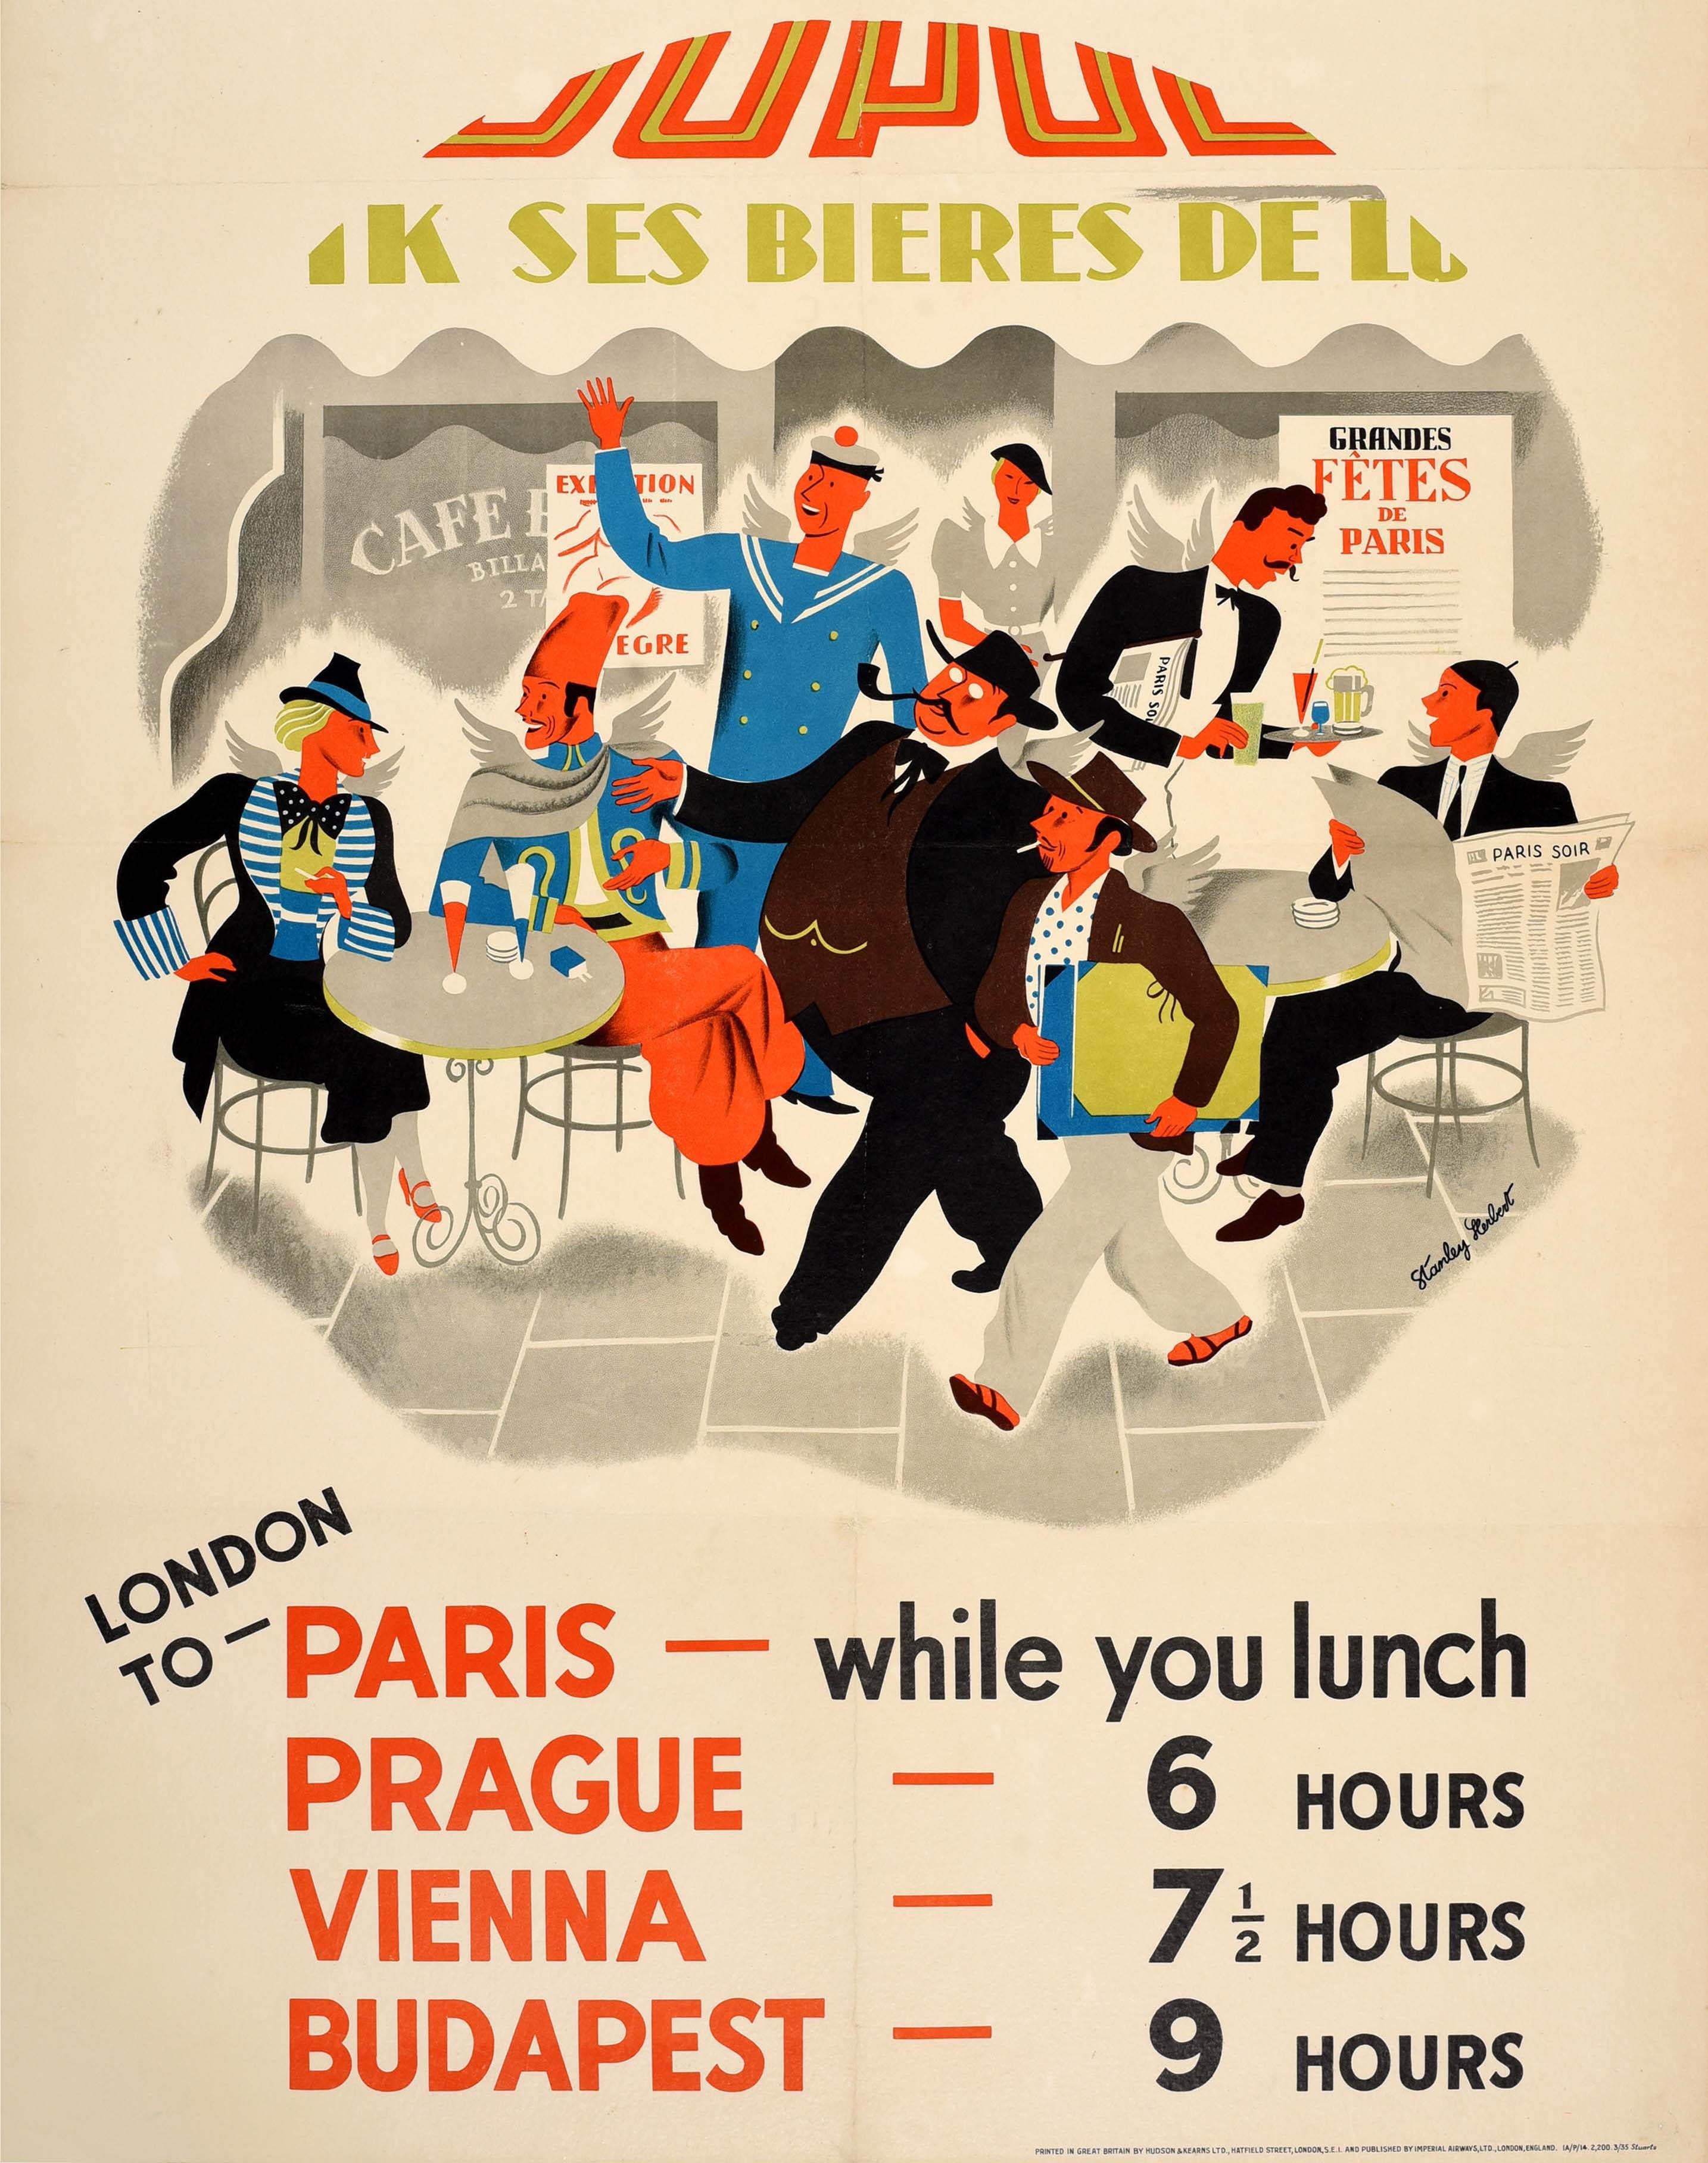 Original vintage travel advertising poster - Fly By Imperial Airways London to Paris while you lunch Prague 6 hours Vienna 7 1/2 hours Budapest 9 hours - featuring colourful artwork by the British commercial artist and poster designer Stanley